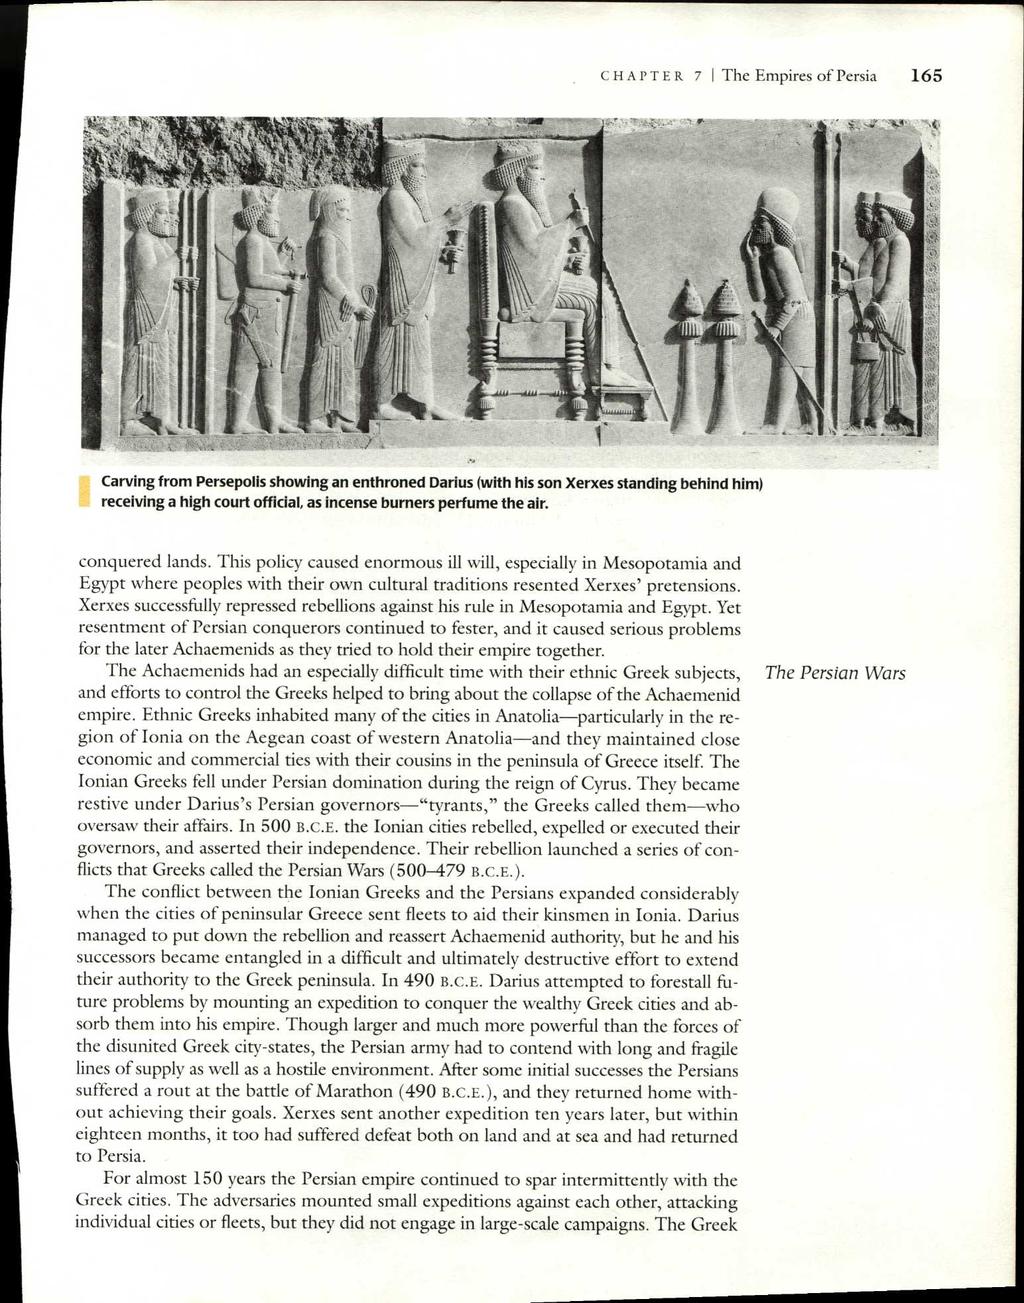 CHAPTER 7 I The Empires of Persia 165 Carving from Persepolis showing an enthroned Darius (with his son Xerxes standing behind him) receiving a high court official, as incense burners perfume the air.